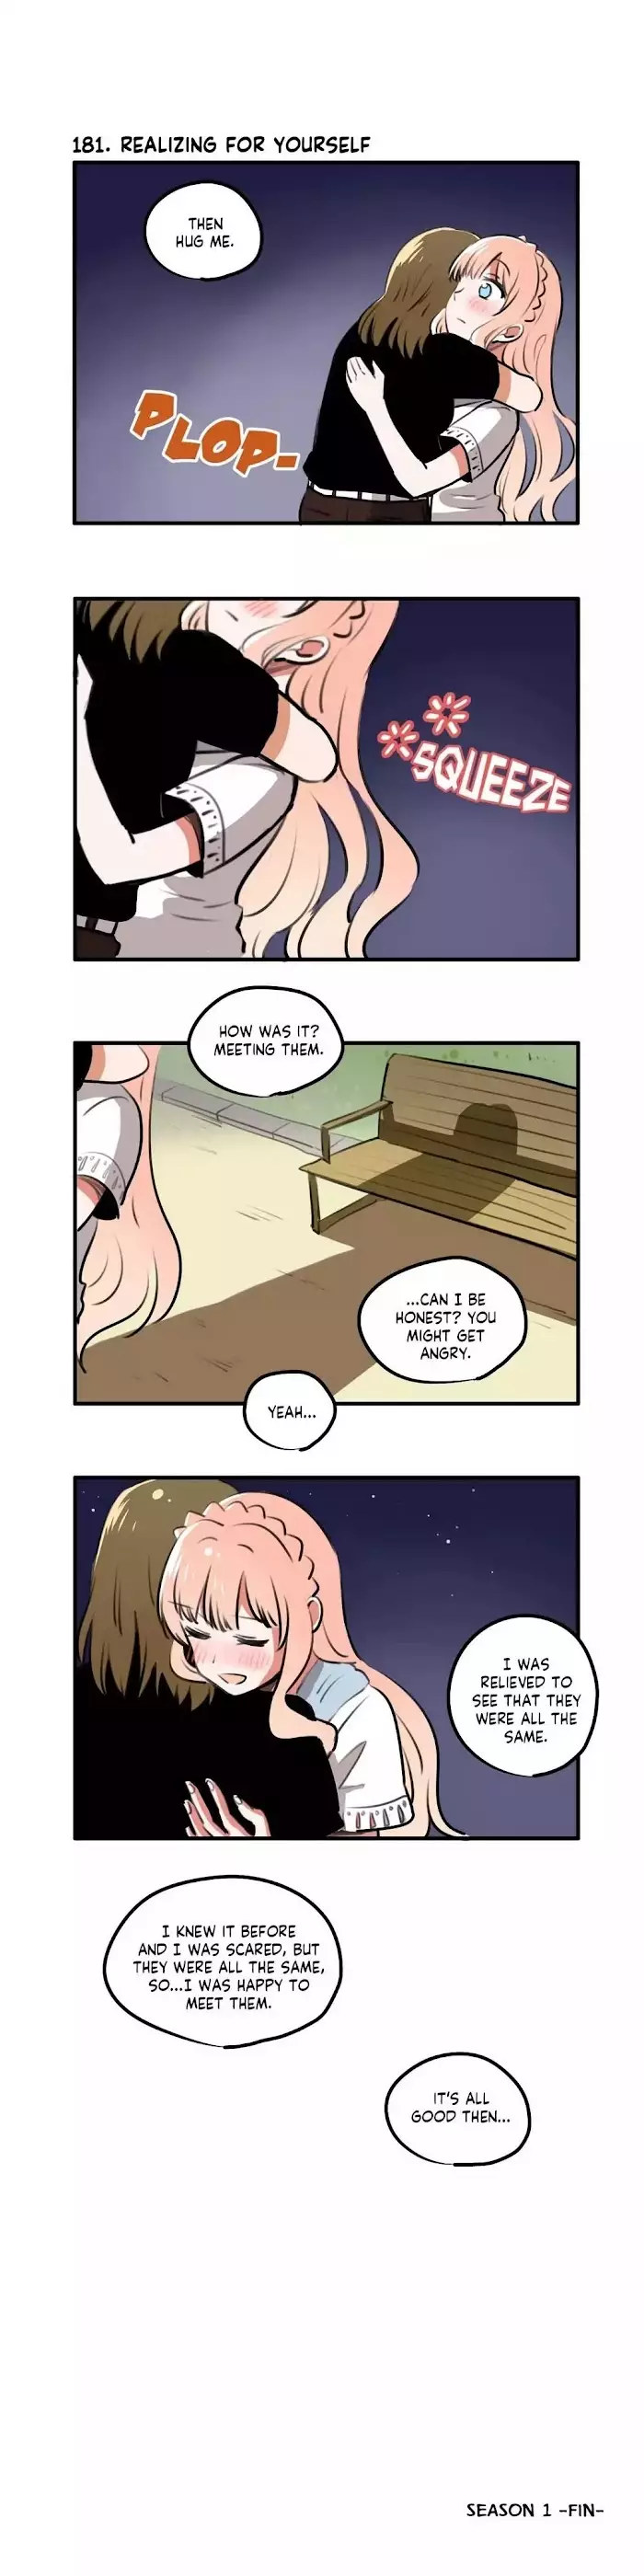 Everyday Lily - 24 page 10-4224c6bb